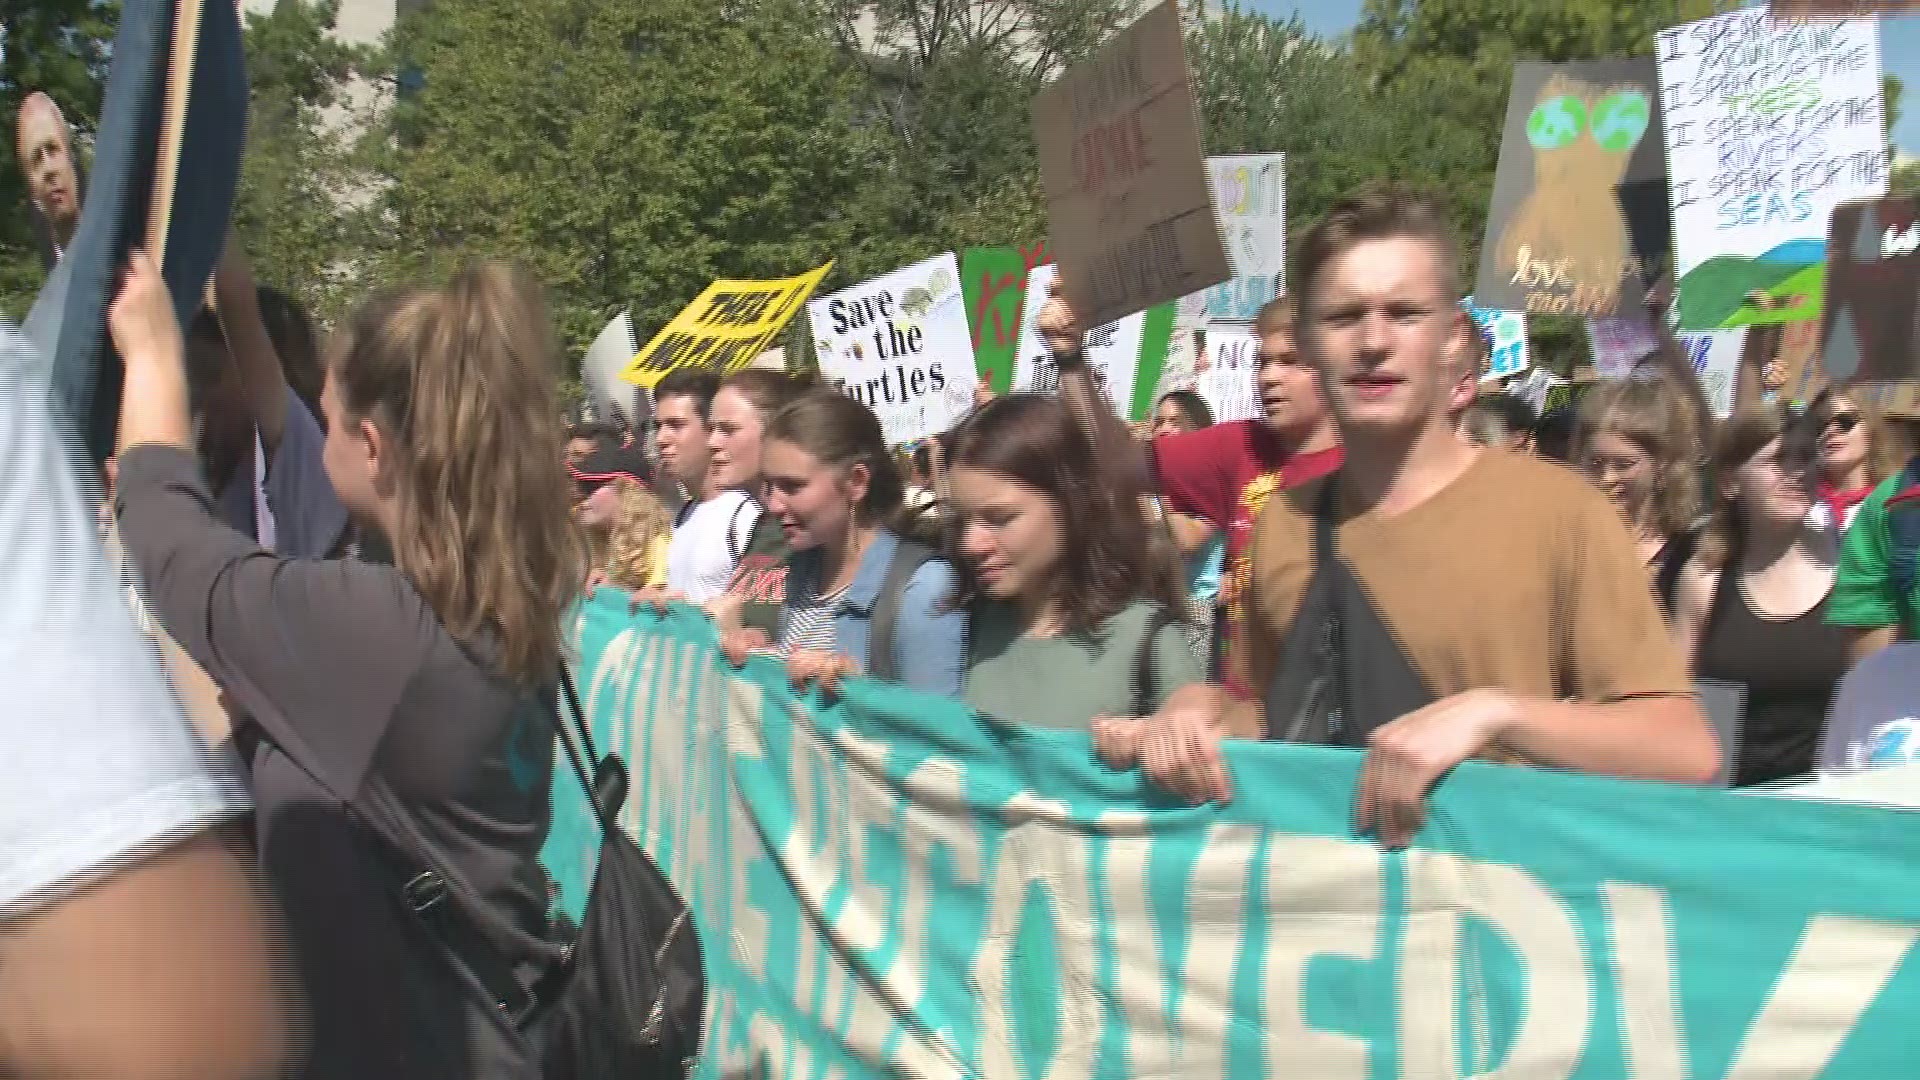 Thousands marched on the Capitol Friday morning in advance of next week's UN Youth Climate Summit.